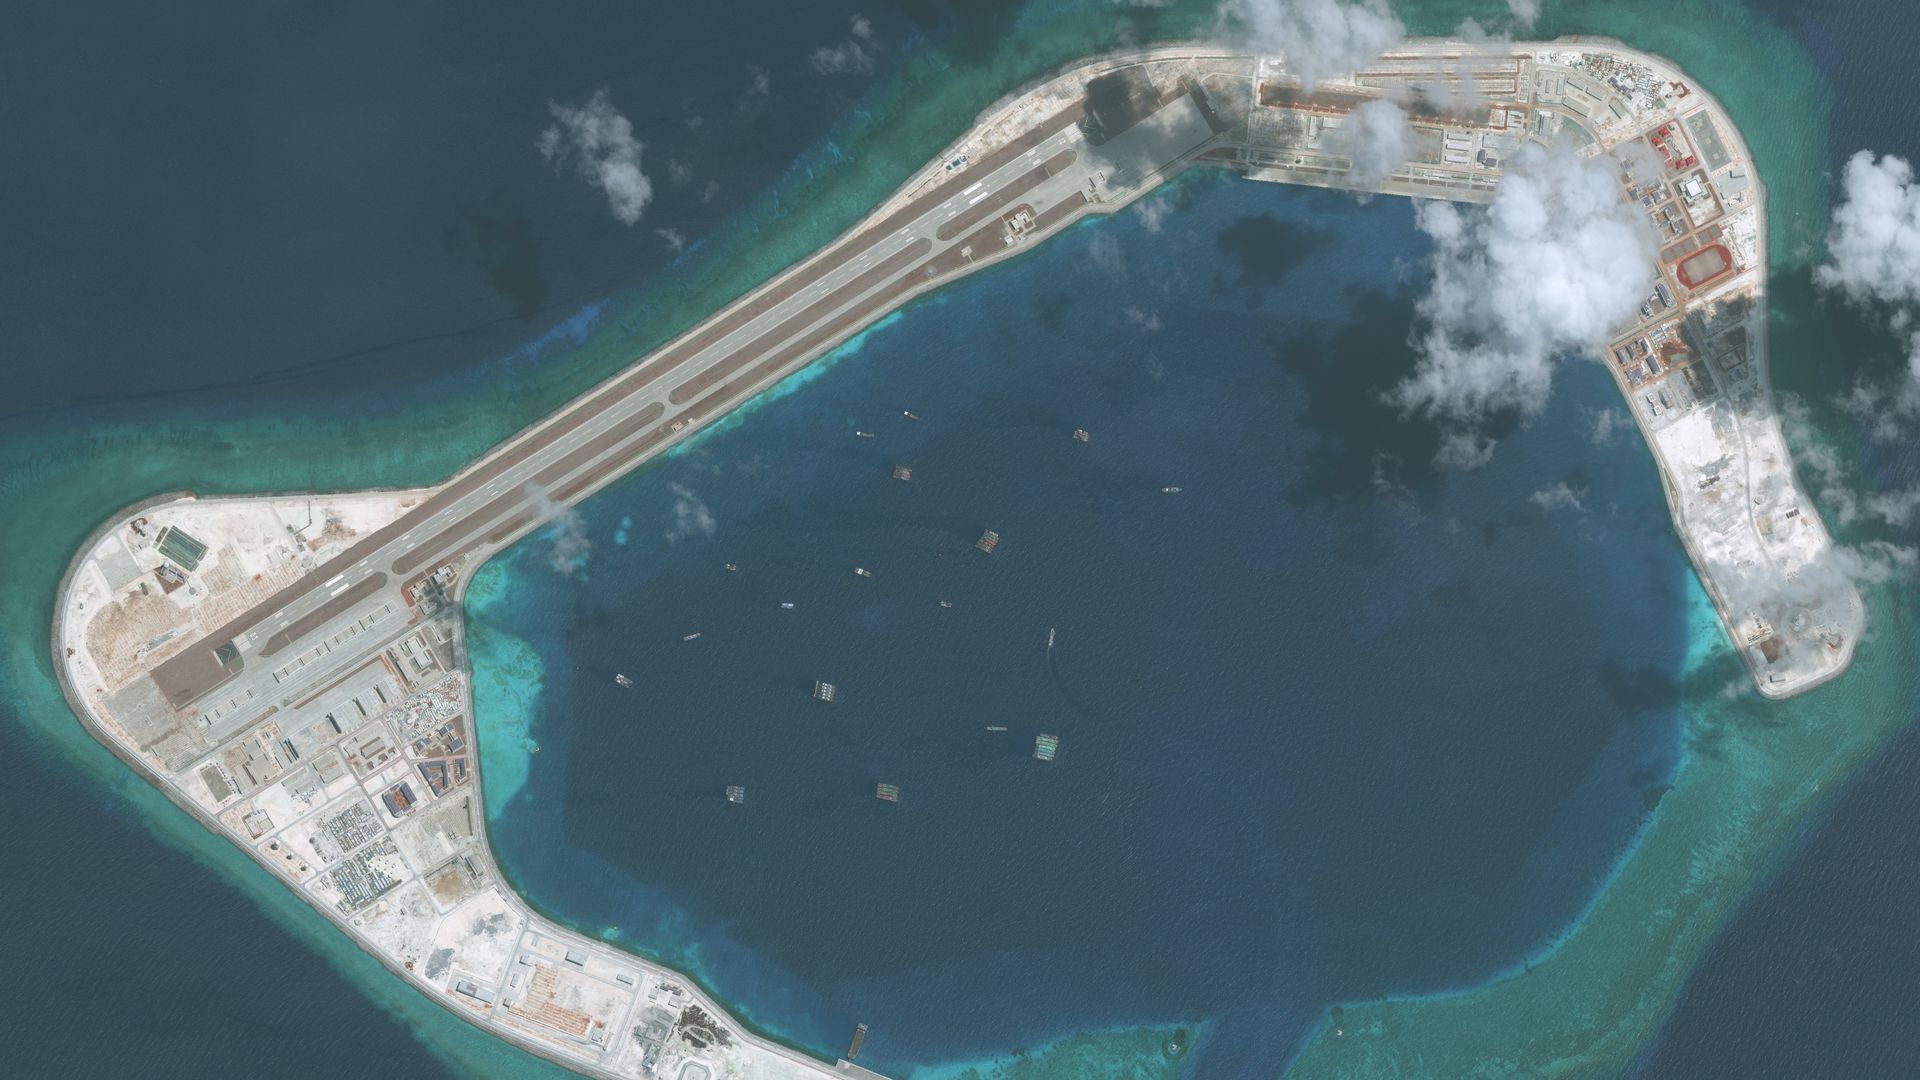 Imagery of the Subi Reef in the South China Sea, a part of the Spratly Islands group. Photo DigitalGlobe via Getty Images.